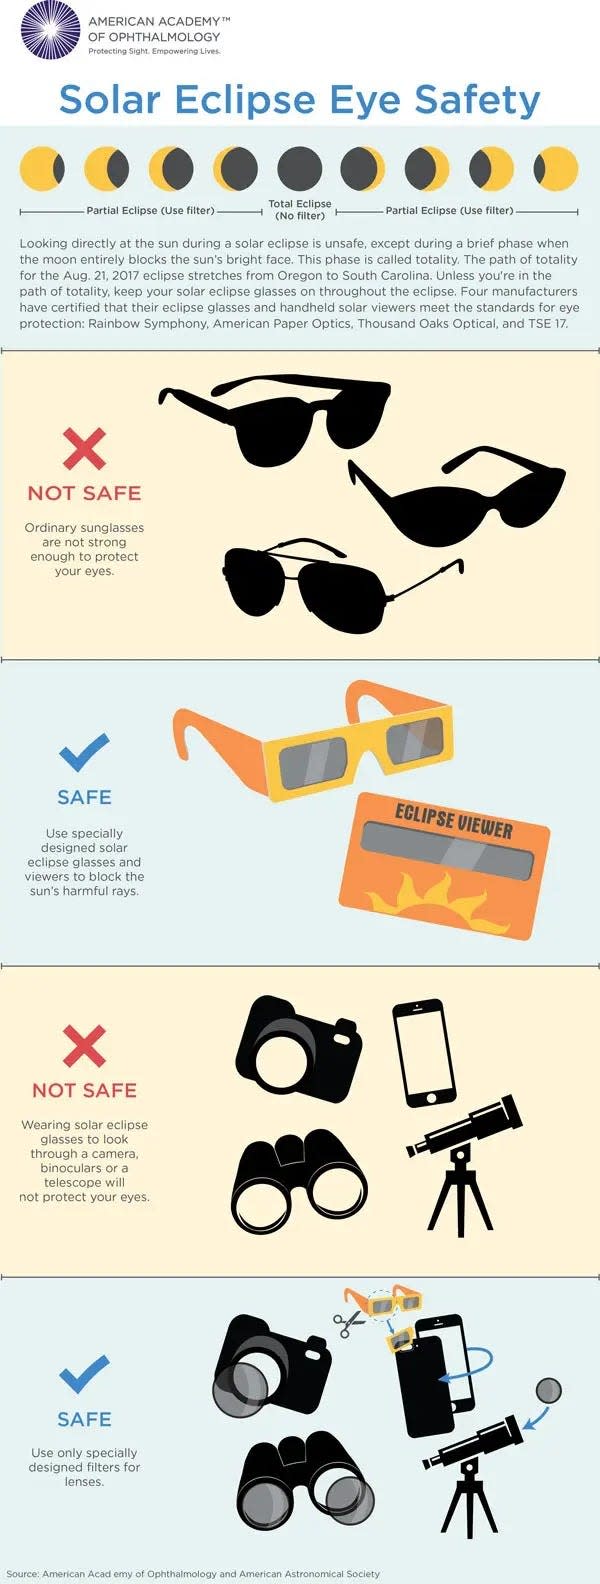 How to keep your eyes safe during a solar eclipse.